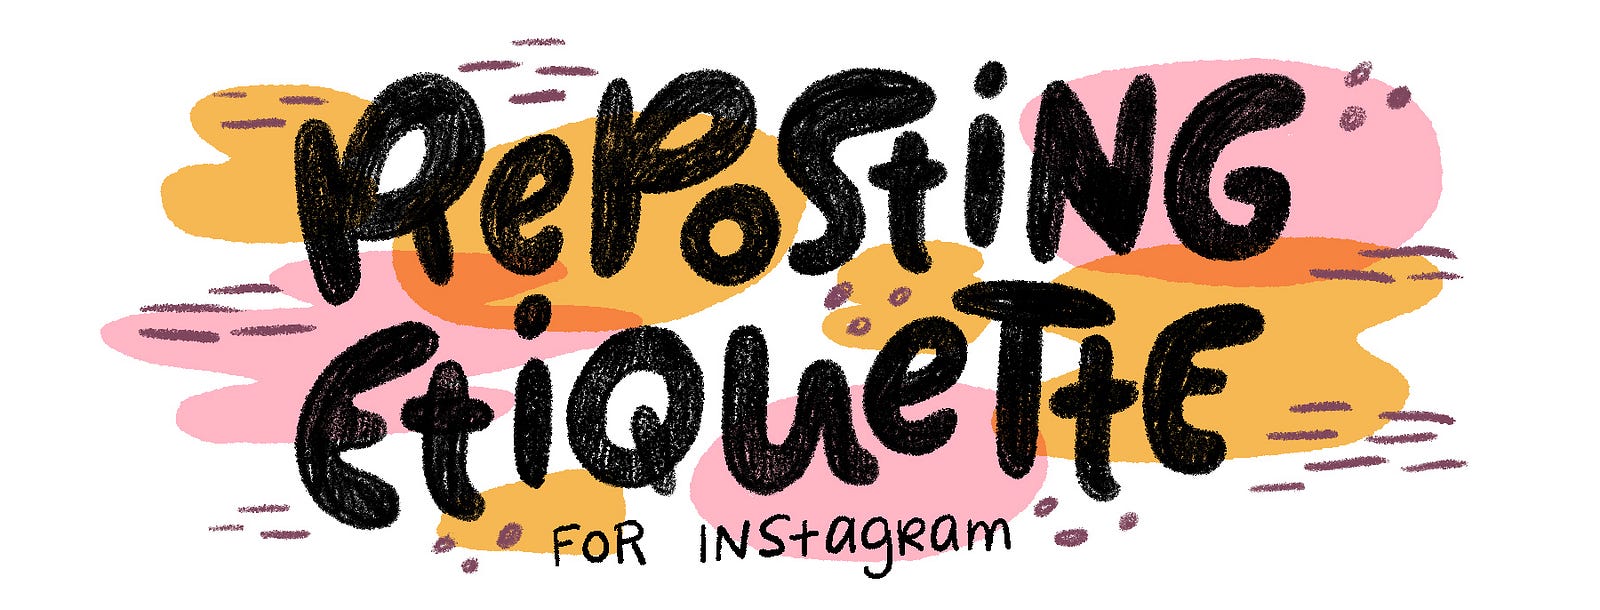 lately i ve seen a lot of chatter about businesses reposting work with and without credit and i wanted to touch on this i ve seen artists post requesting - the best way for b!   usinesses to repost on instagram